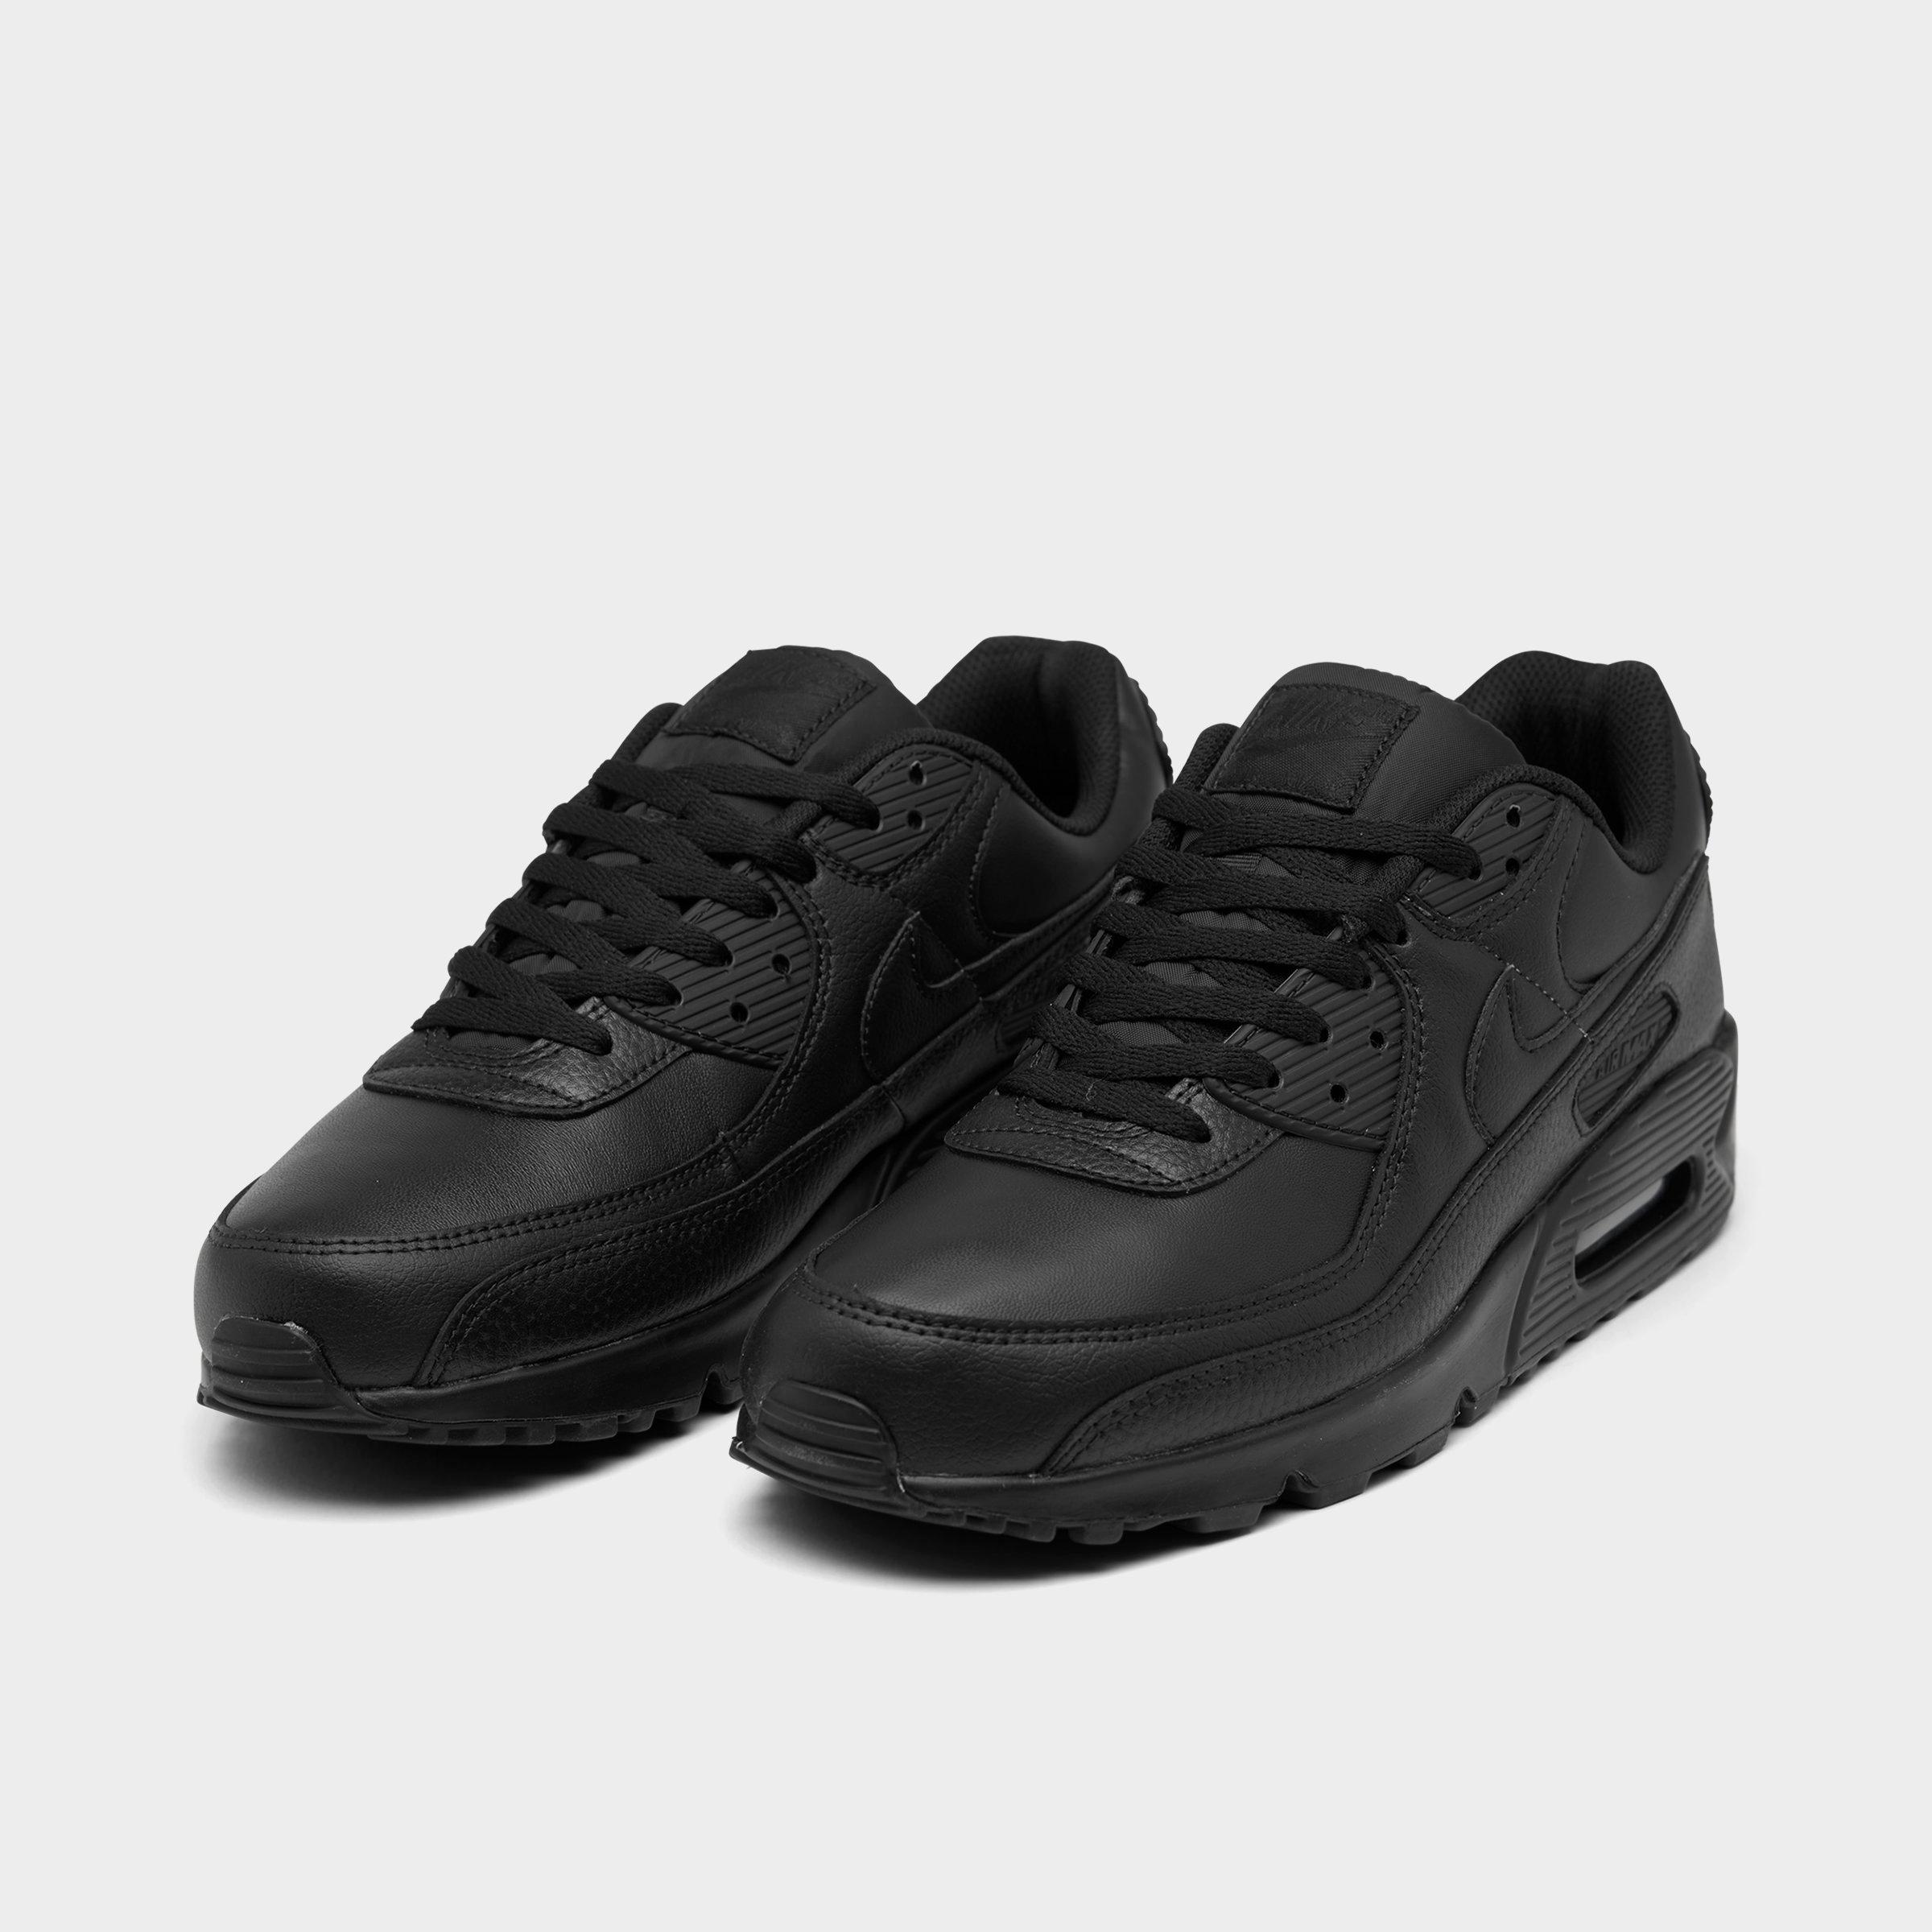 Nike Air Max 90 Leather Casual Shoes 